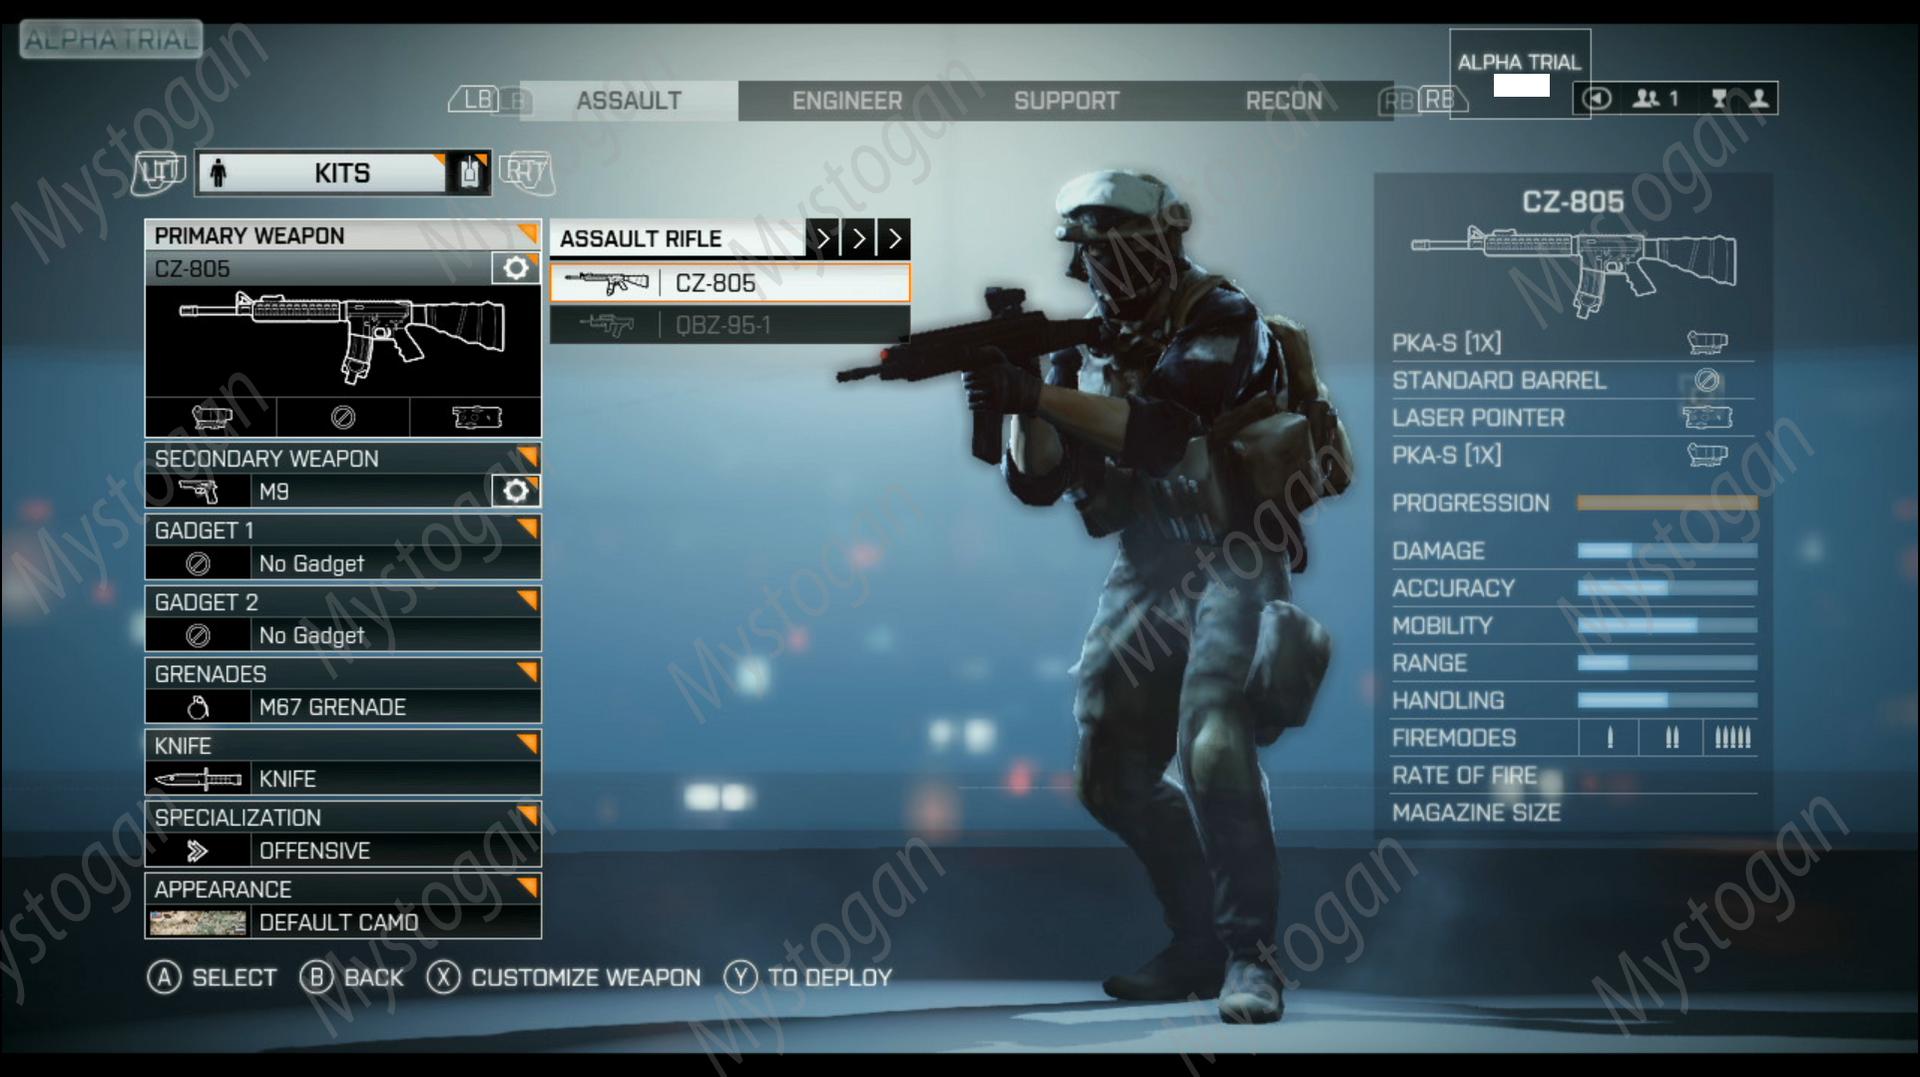 Battlefield 4 alpha phase begins, recommended specs and details